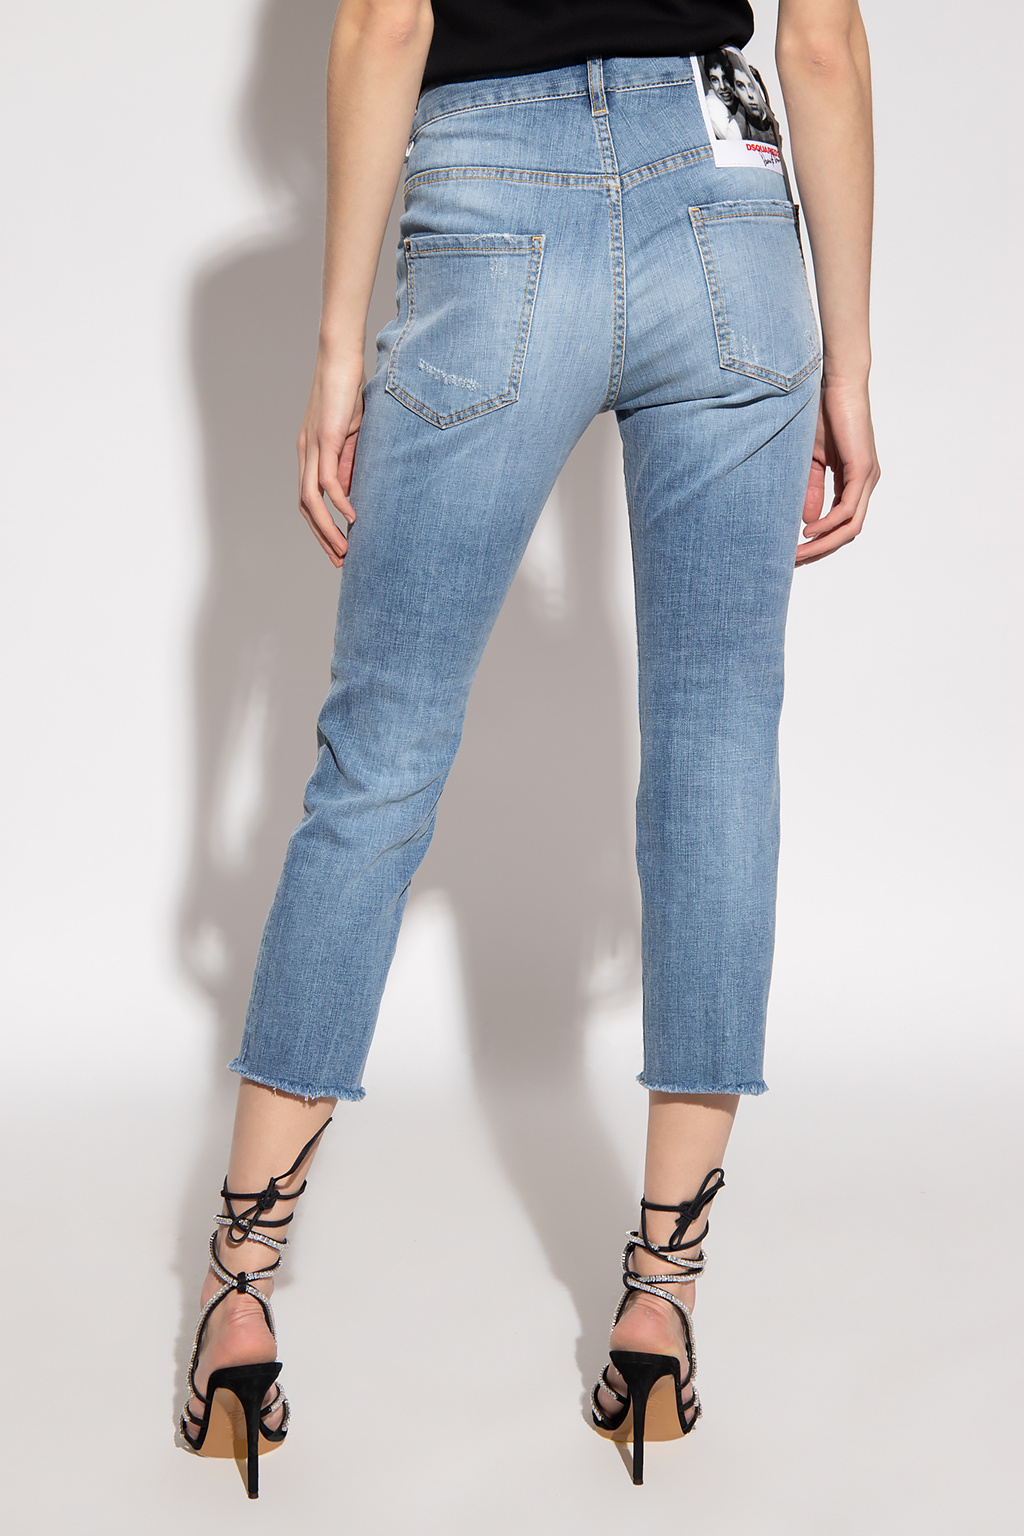 Dsquared2 ‘Cool Girl Cropped’ jeans | Women's Clothing | Vitkac